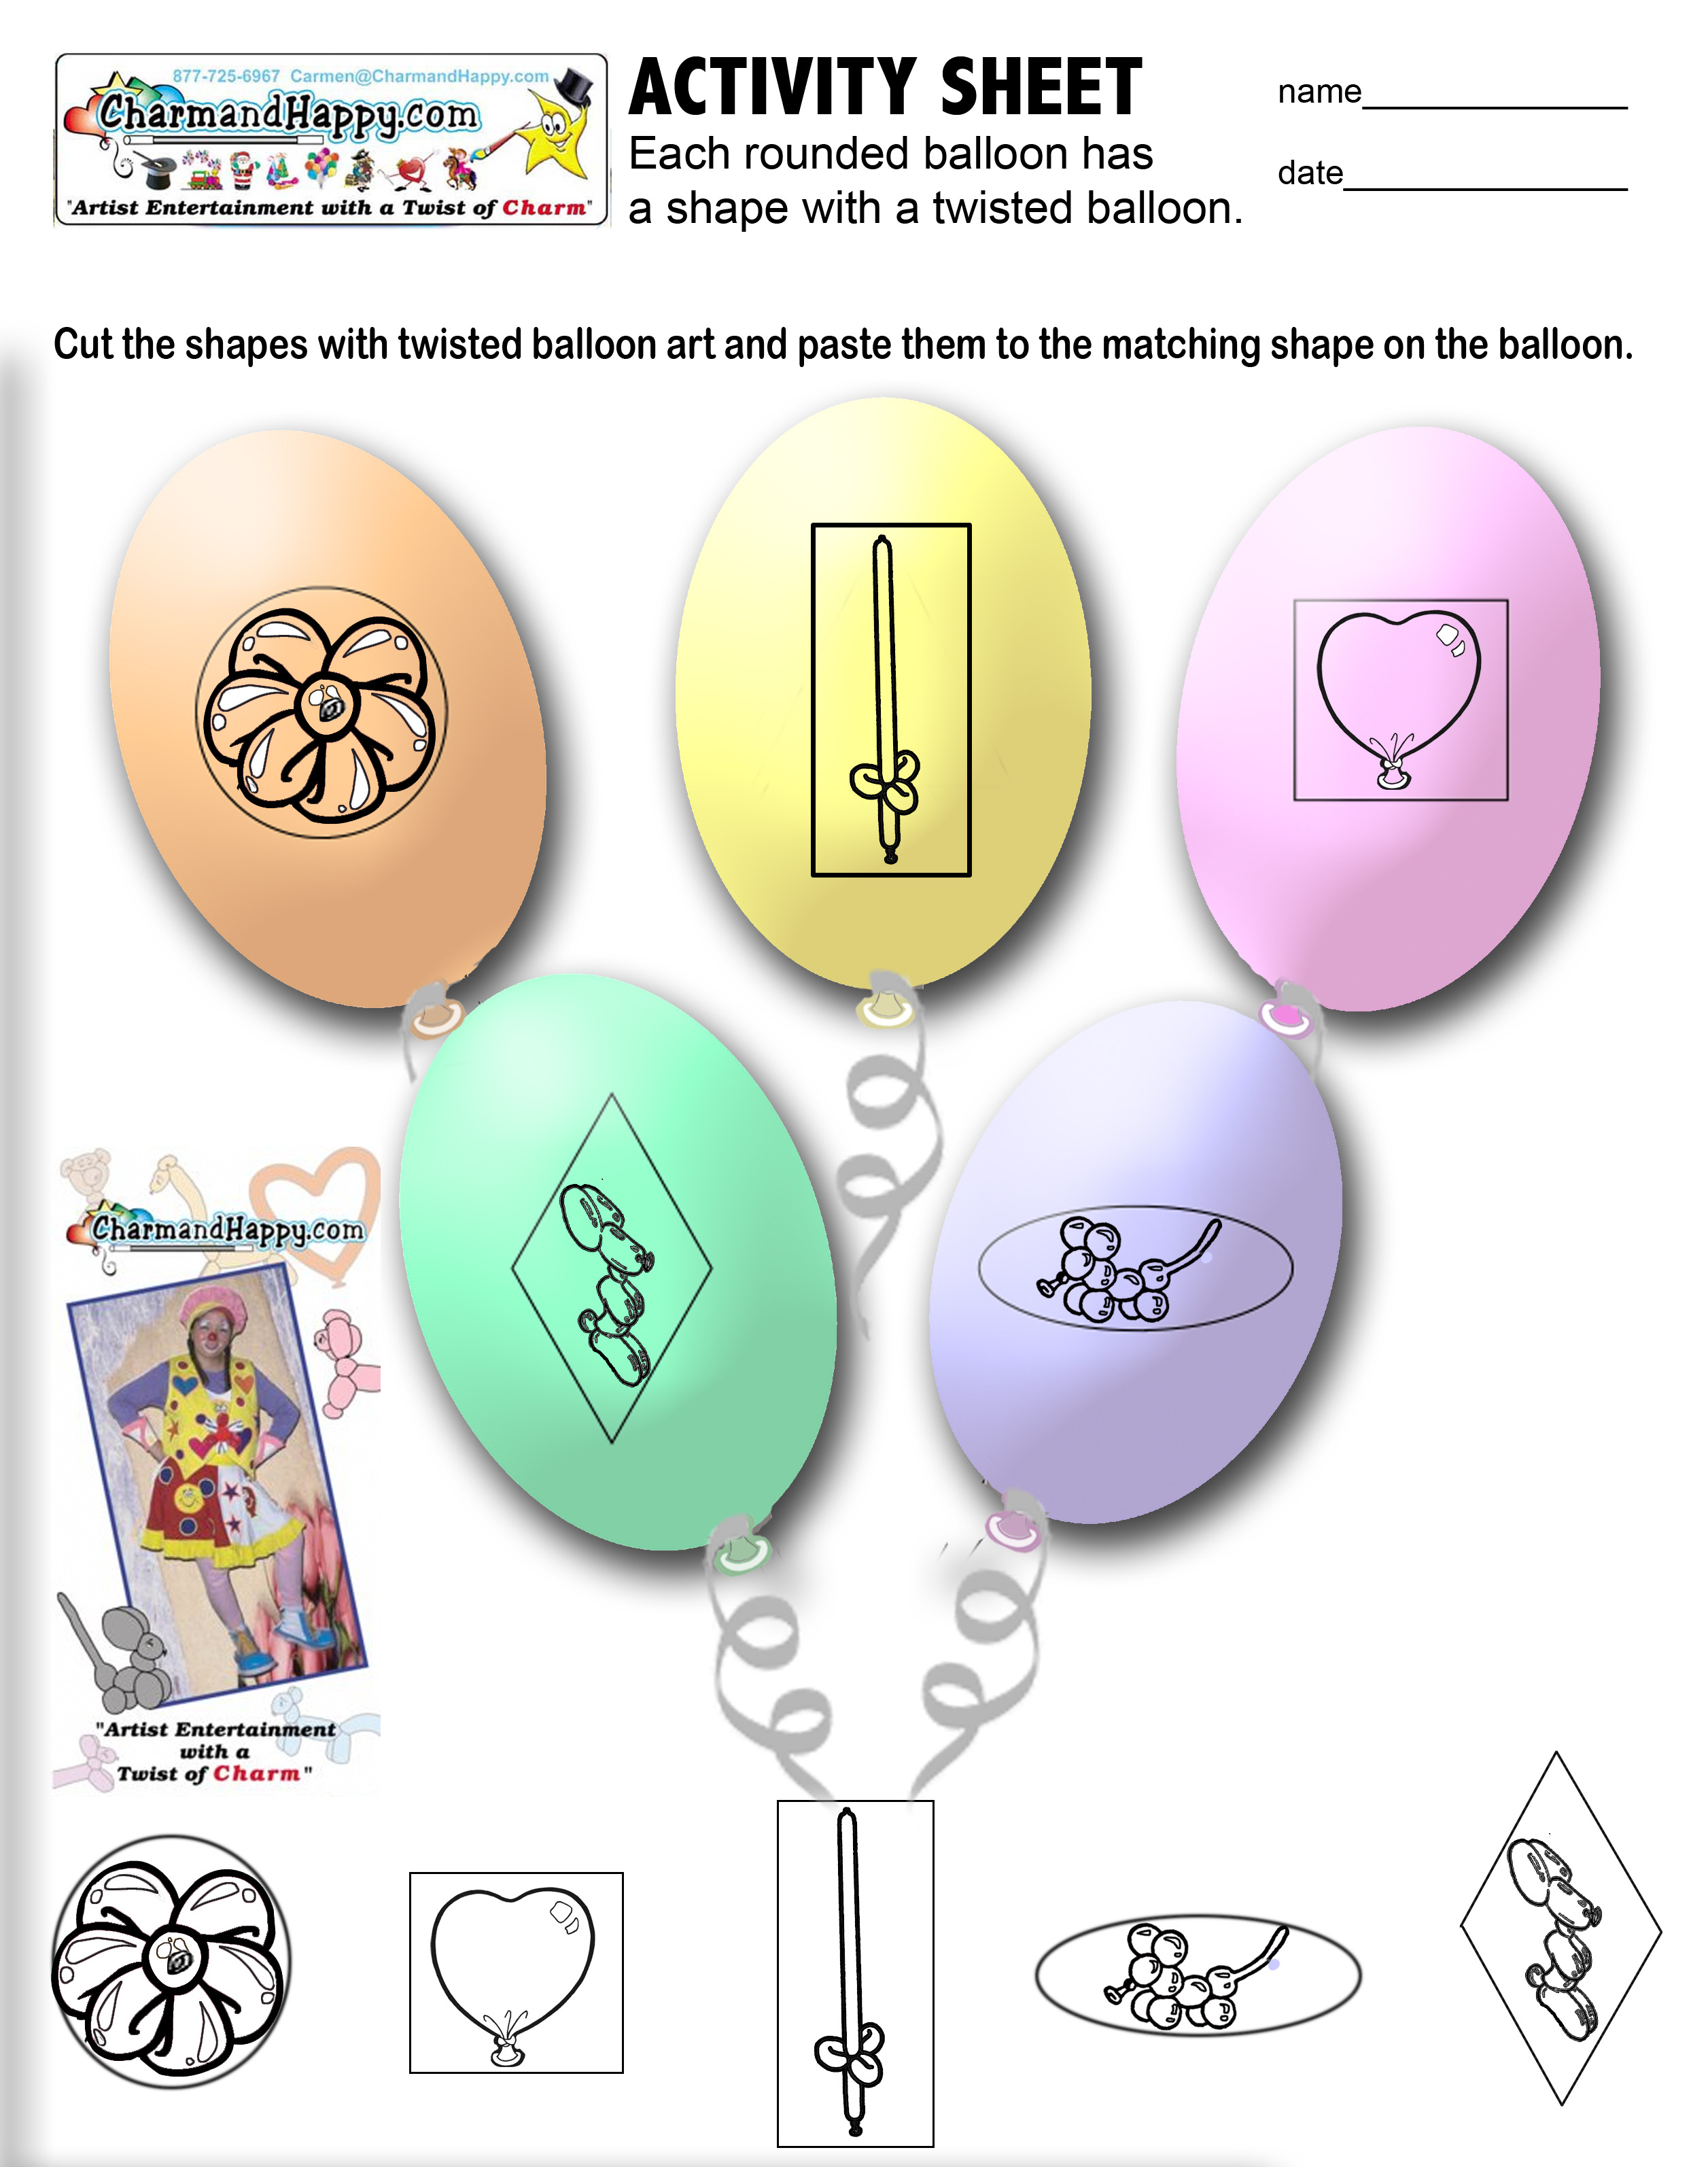 CharmandHappy.com kids activity balloon cut out matching